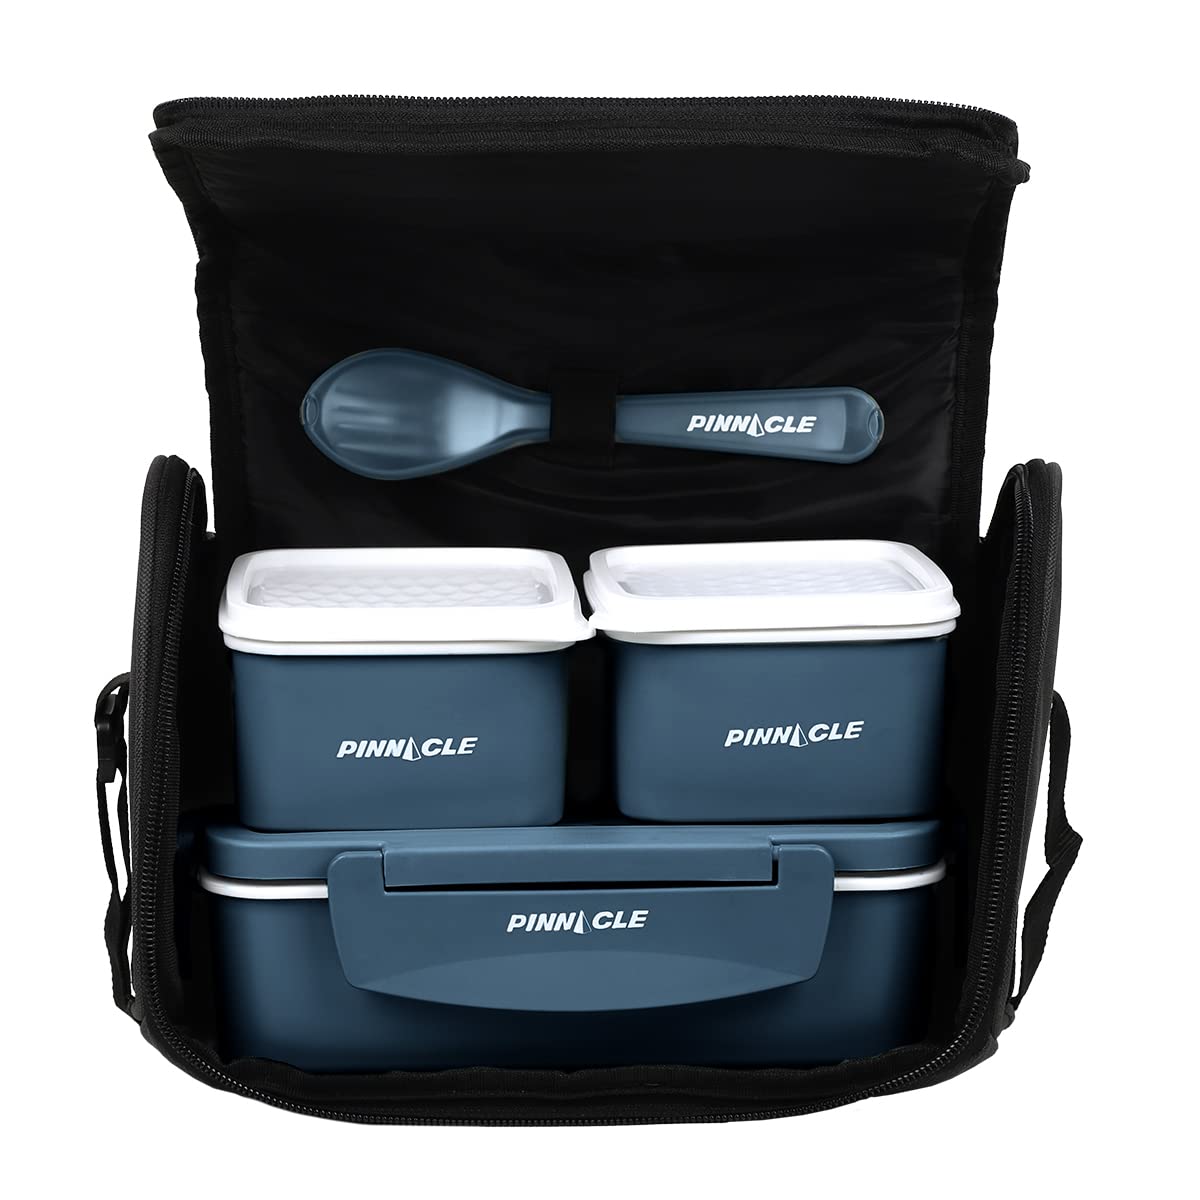 Pinnacle Prata Stainless Steel Lunch Box Kit with Insulated Bag | Lunch Box for Kids & Office Women | Lunch Box for School | Spoon & Fork Set | Leak Proof Lunch Box | 1250ml (Blue)